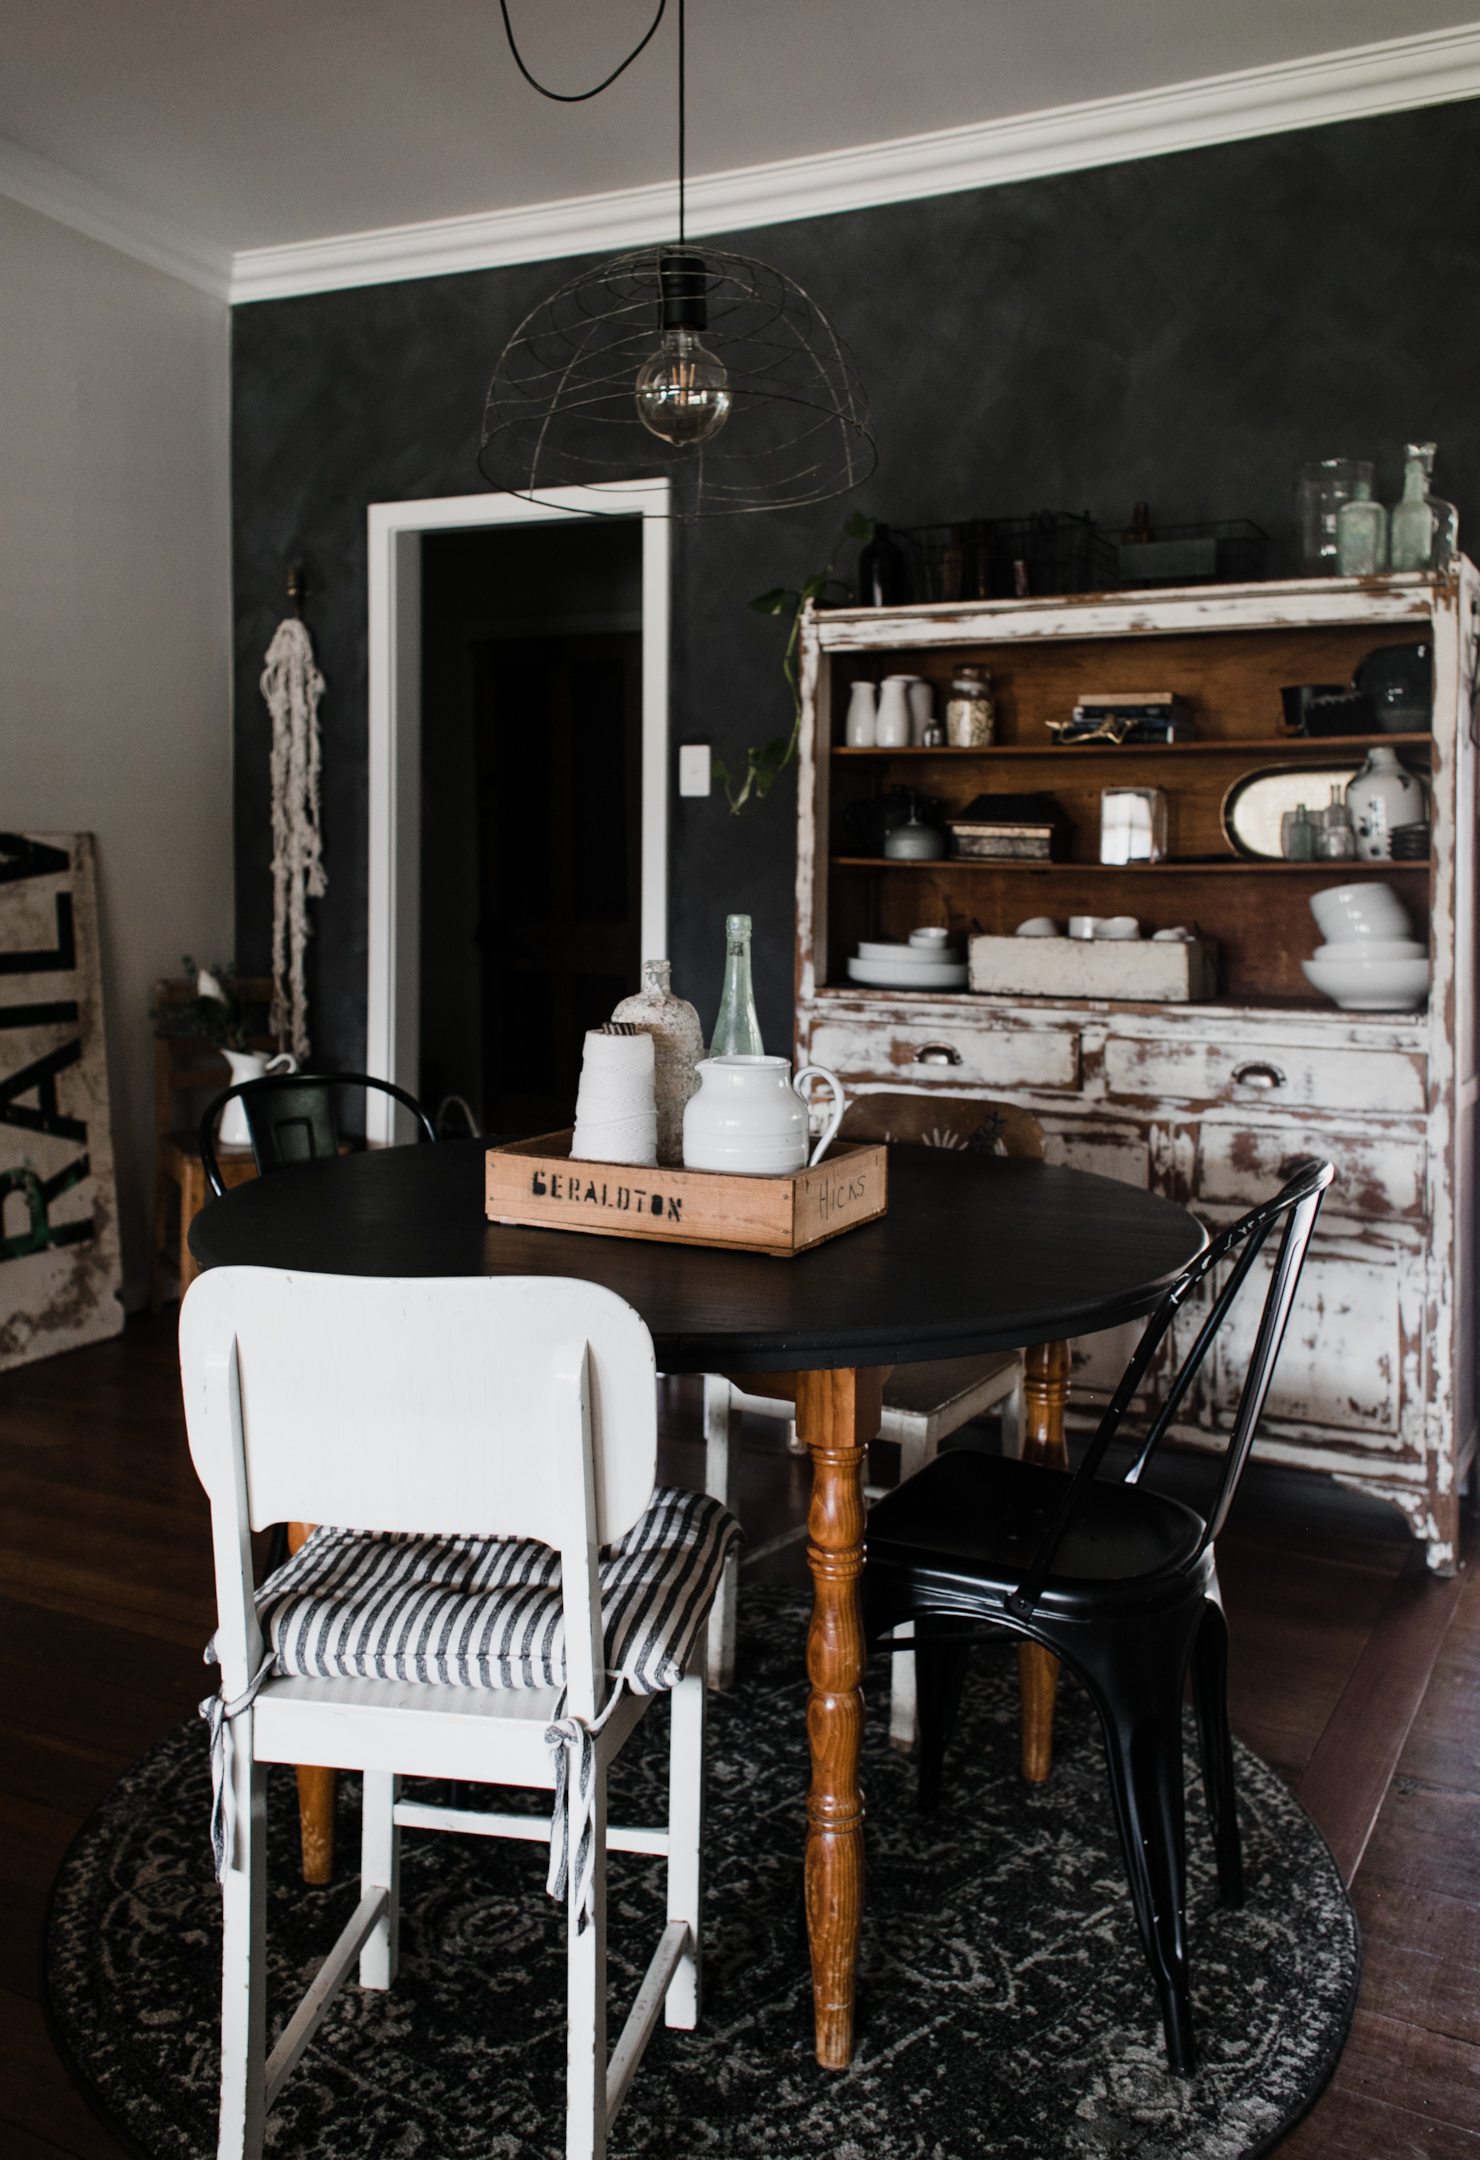 Image credit: https://www.pexels.com/photo/black-wooden-table-in-a-dining-room-with-different-chairs-6125625/